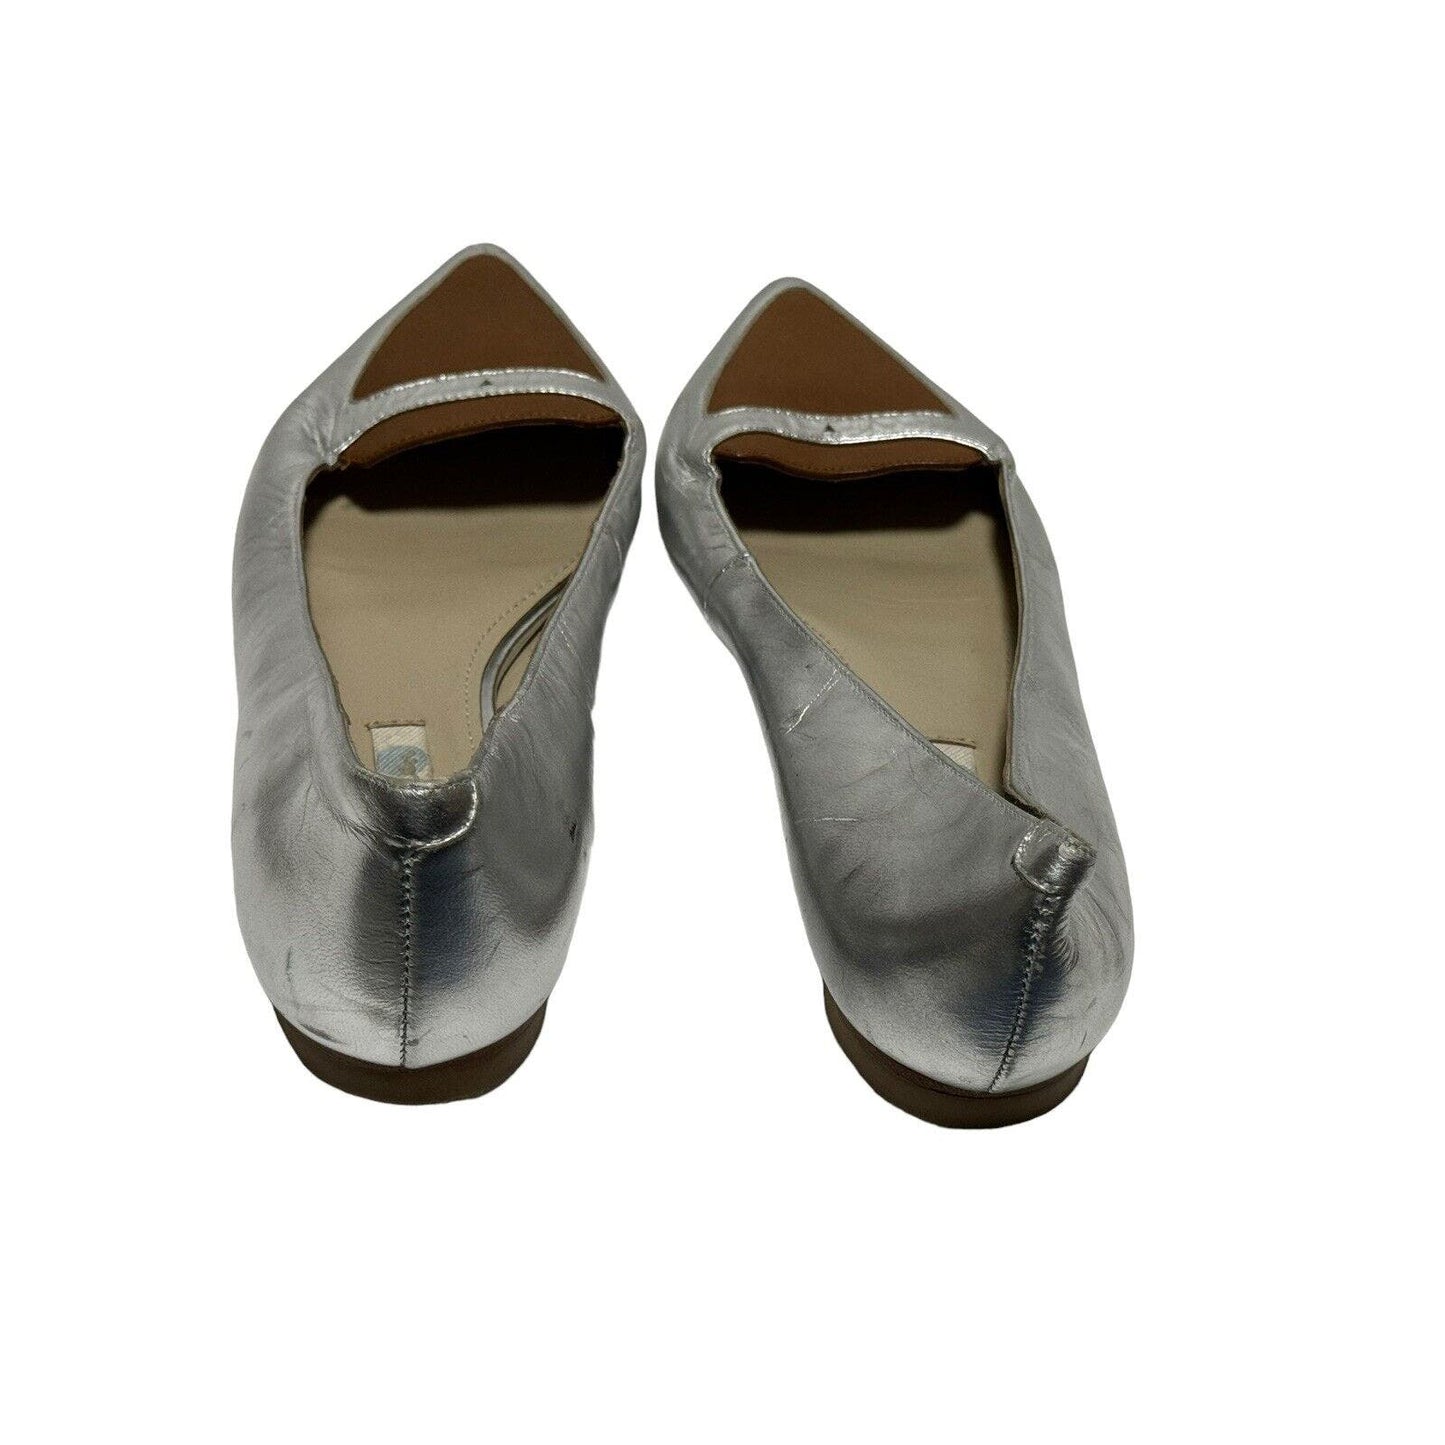 Boden Patent Leather Sliver Brown Pointed Ballet Flats Slip On Shoes 37.5 US 6.5